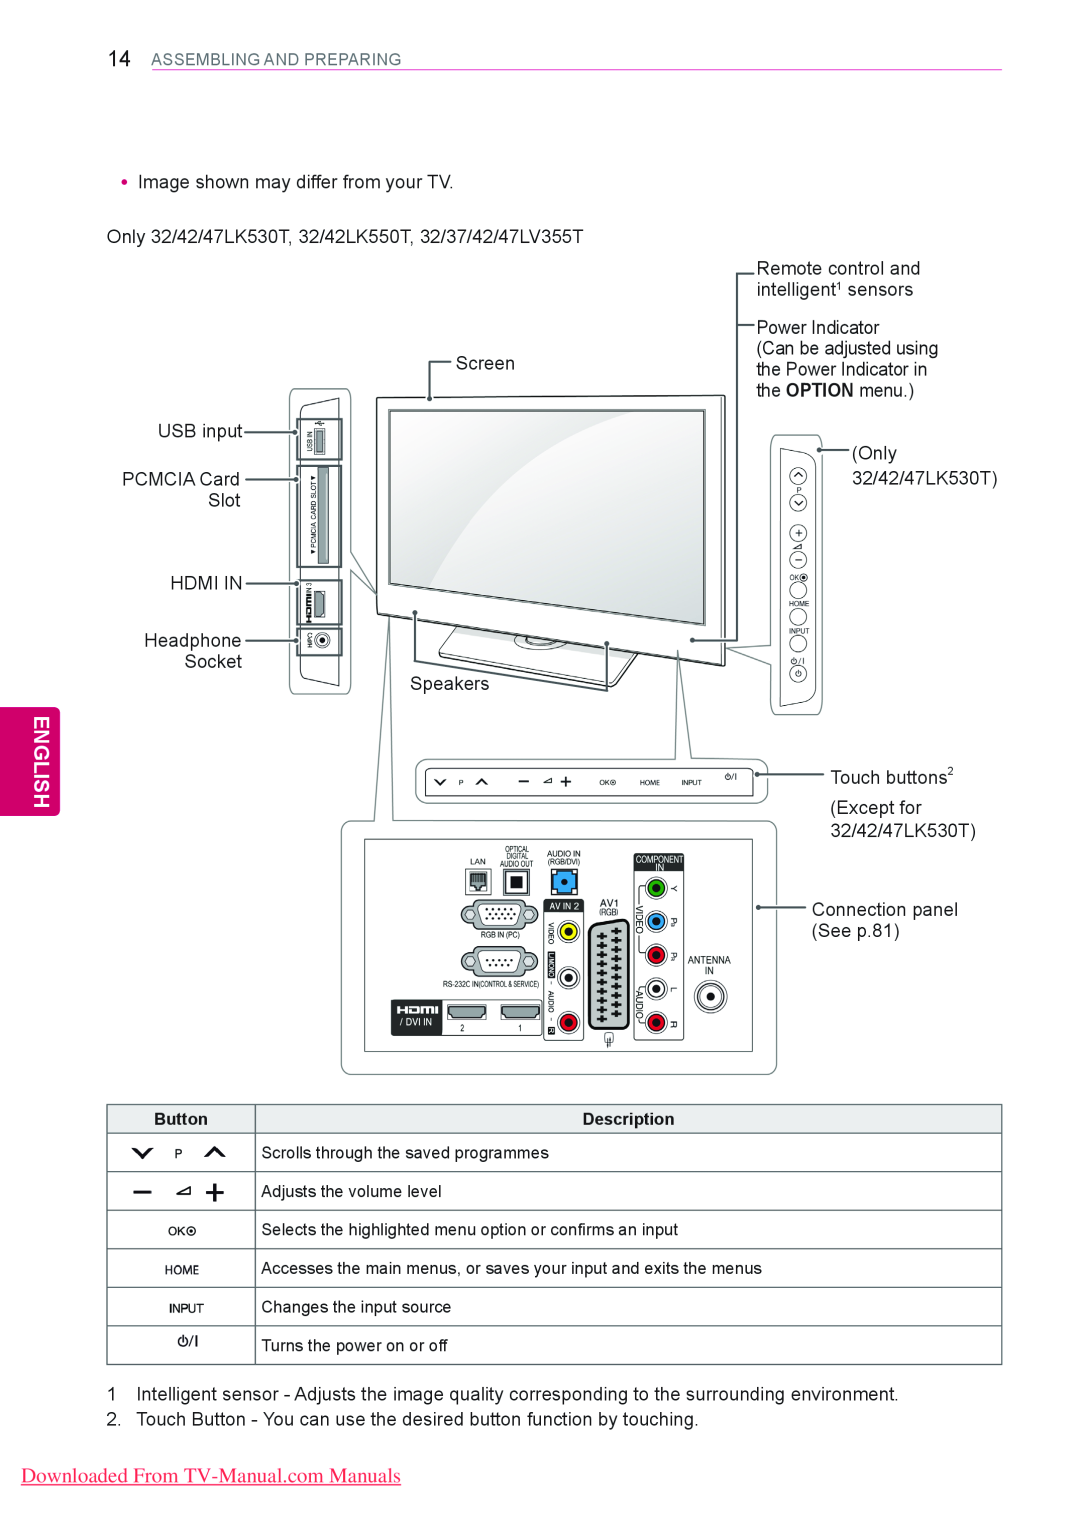 LG Electronics 50PV35**, 50/60PZ55**, 50/60PZ25** English, Downloaded From TV-Manual.com Manuals, Assembling And Preparing 